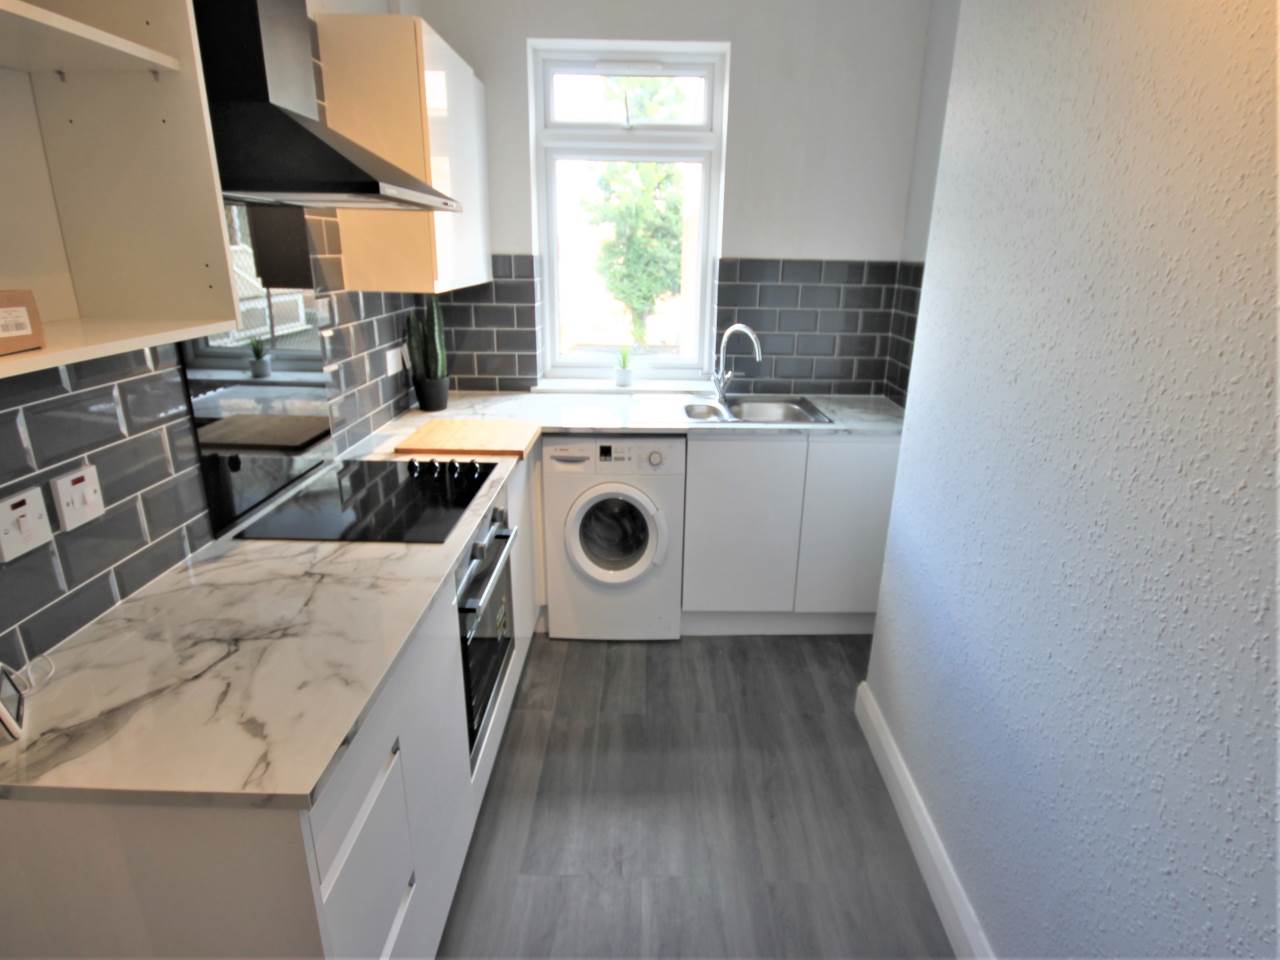 1 bed flat to rent in Cranbrook Road, Ilford, IG1 